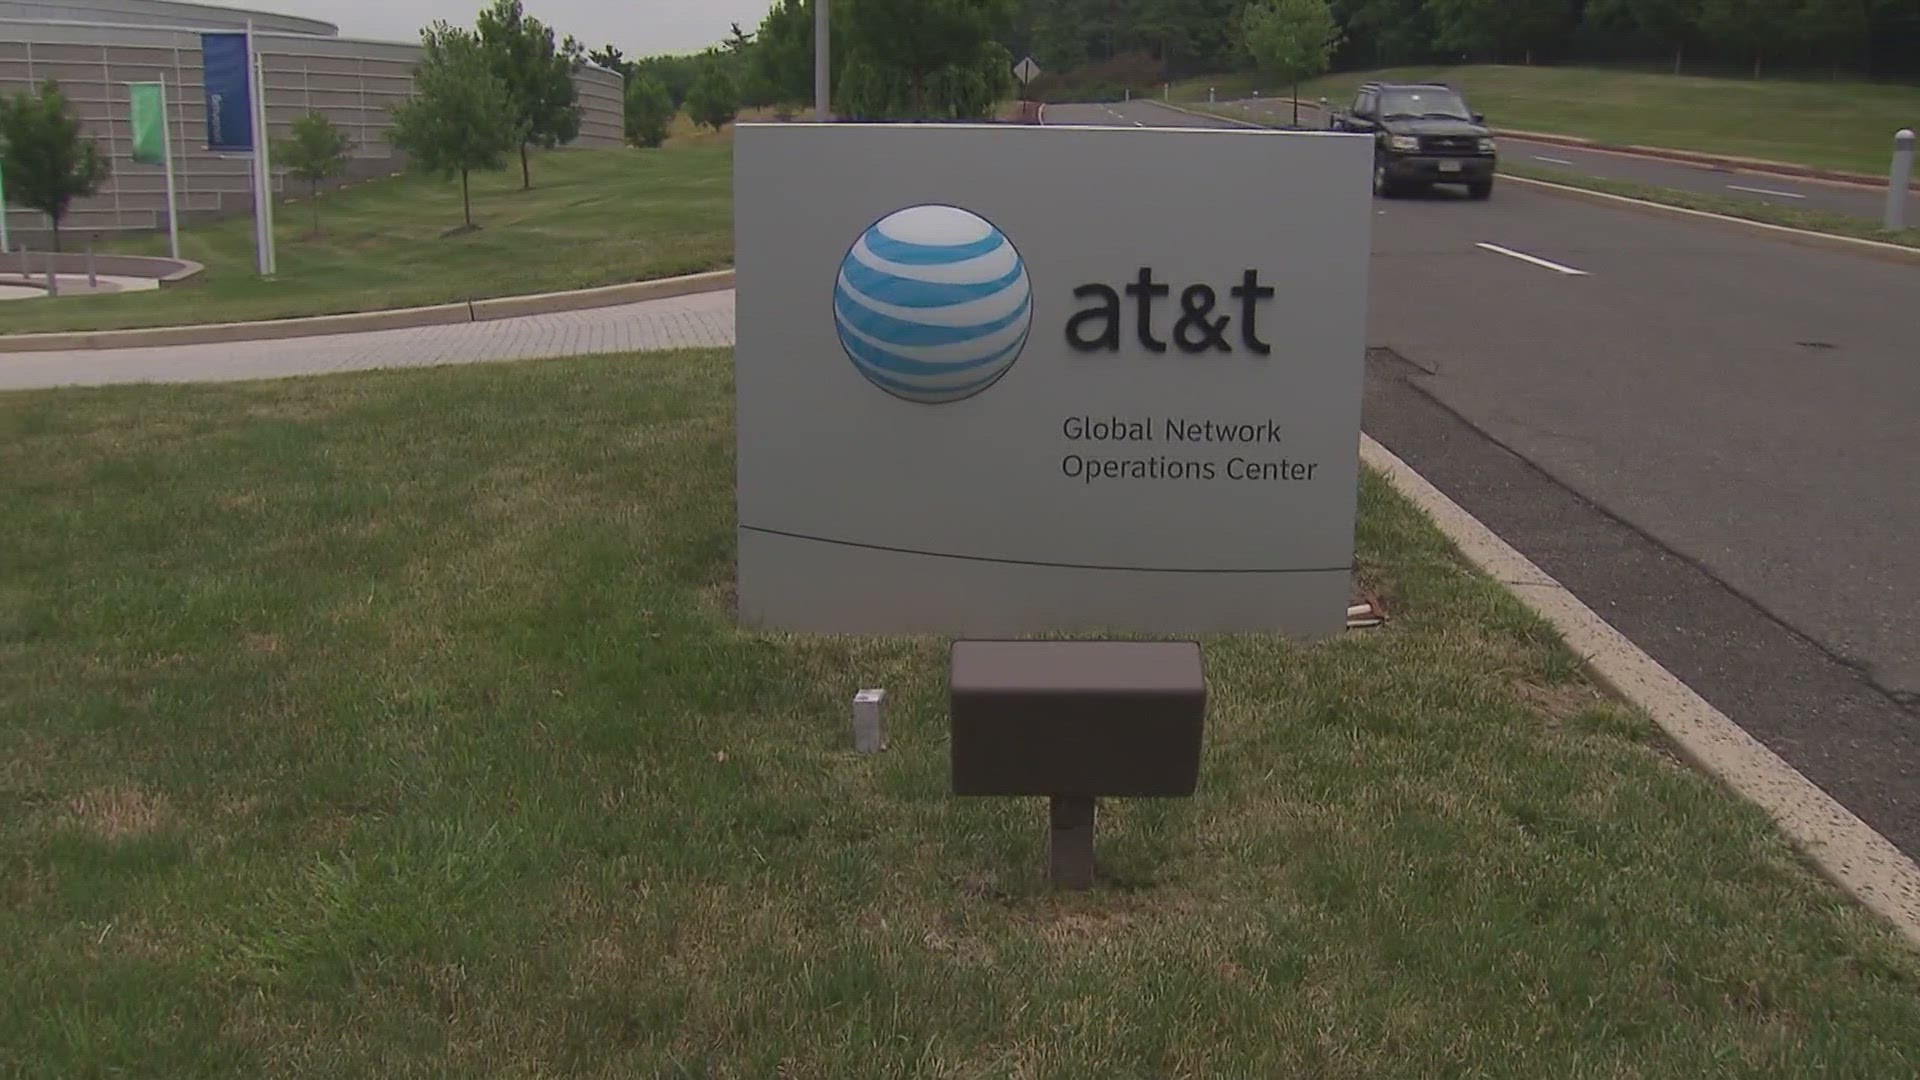 AT&T confirmed in a statement some customers "are experiencing wireless service interruptions this morning."